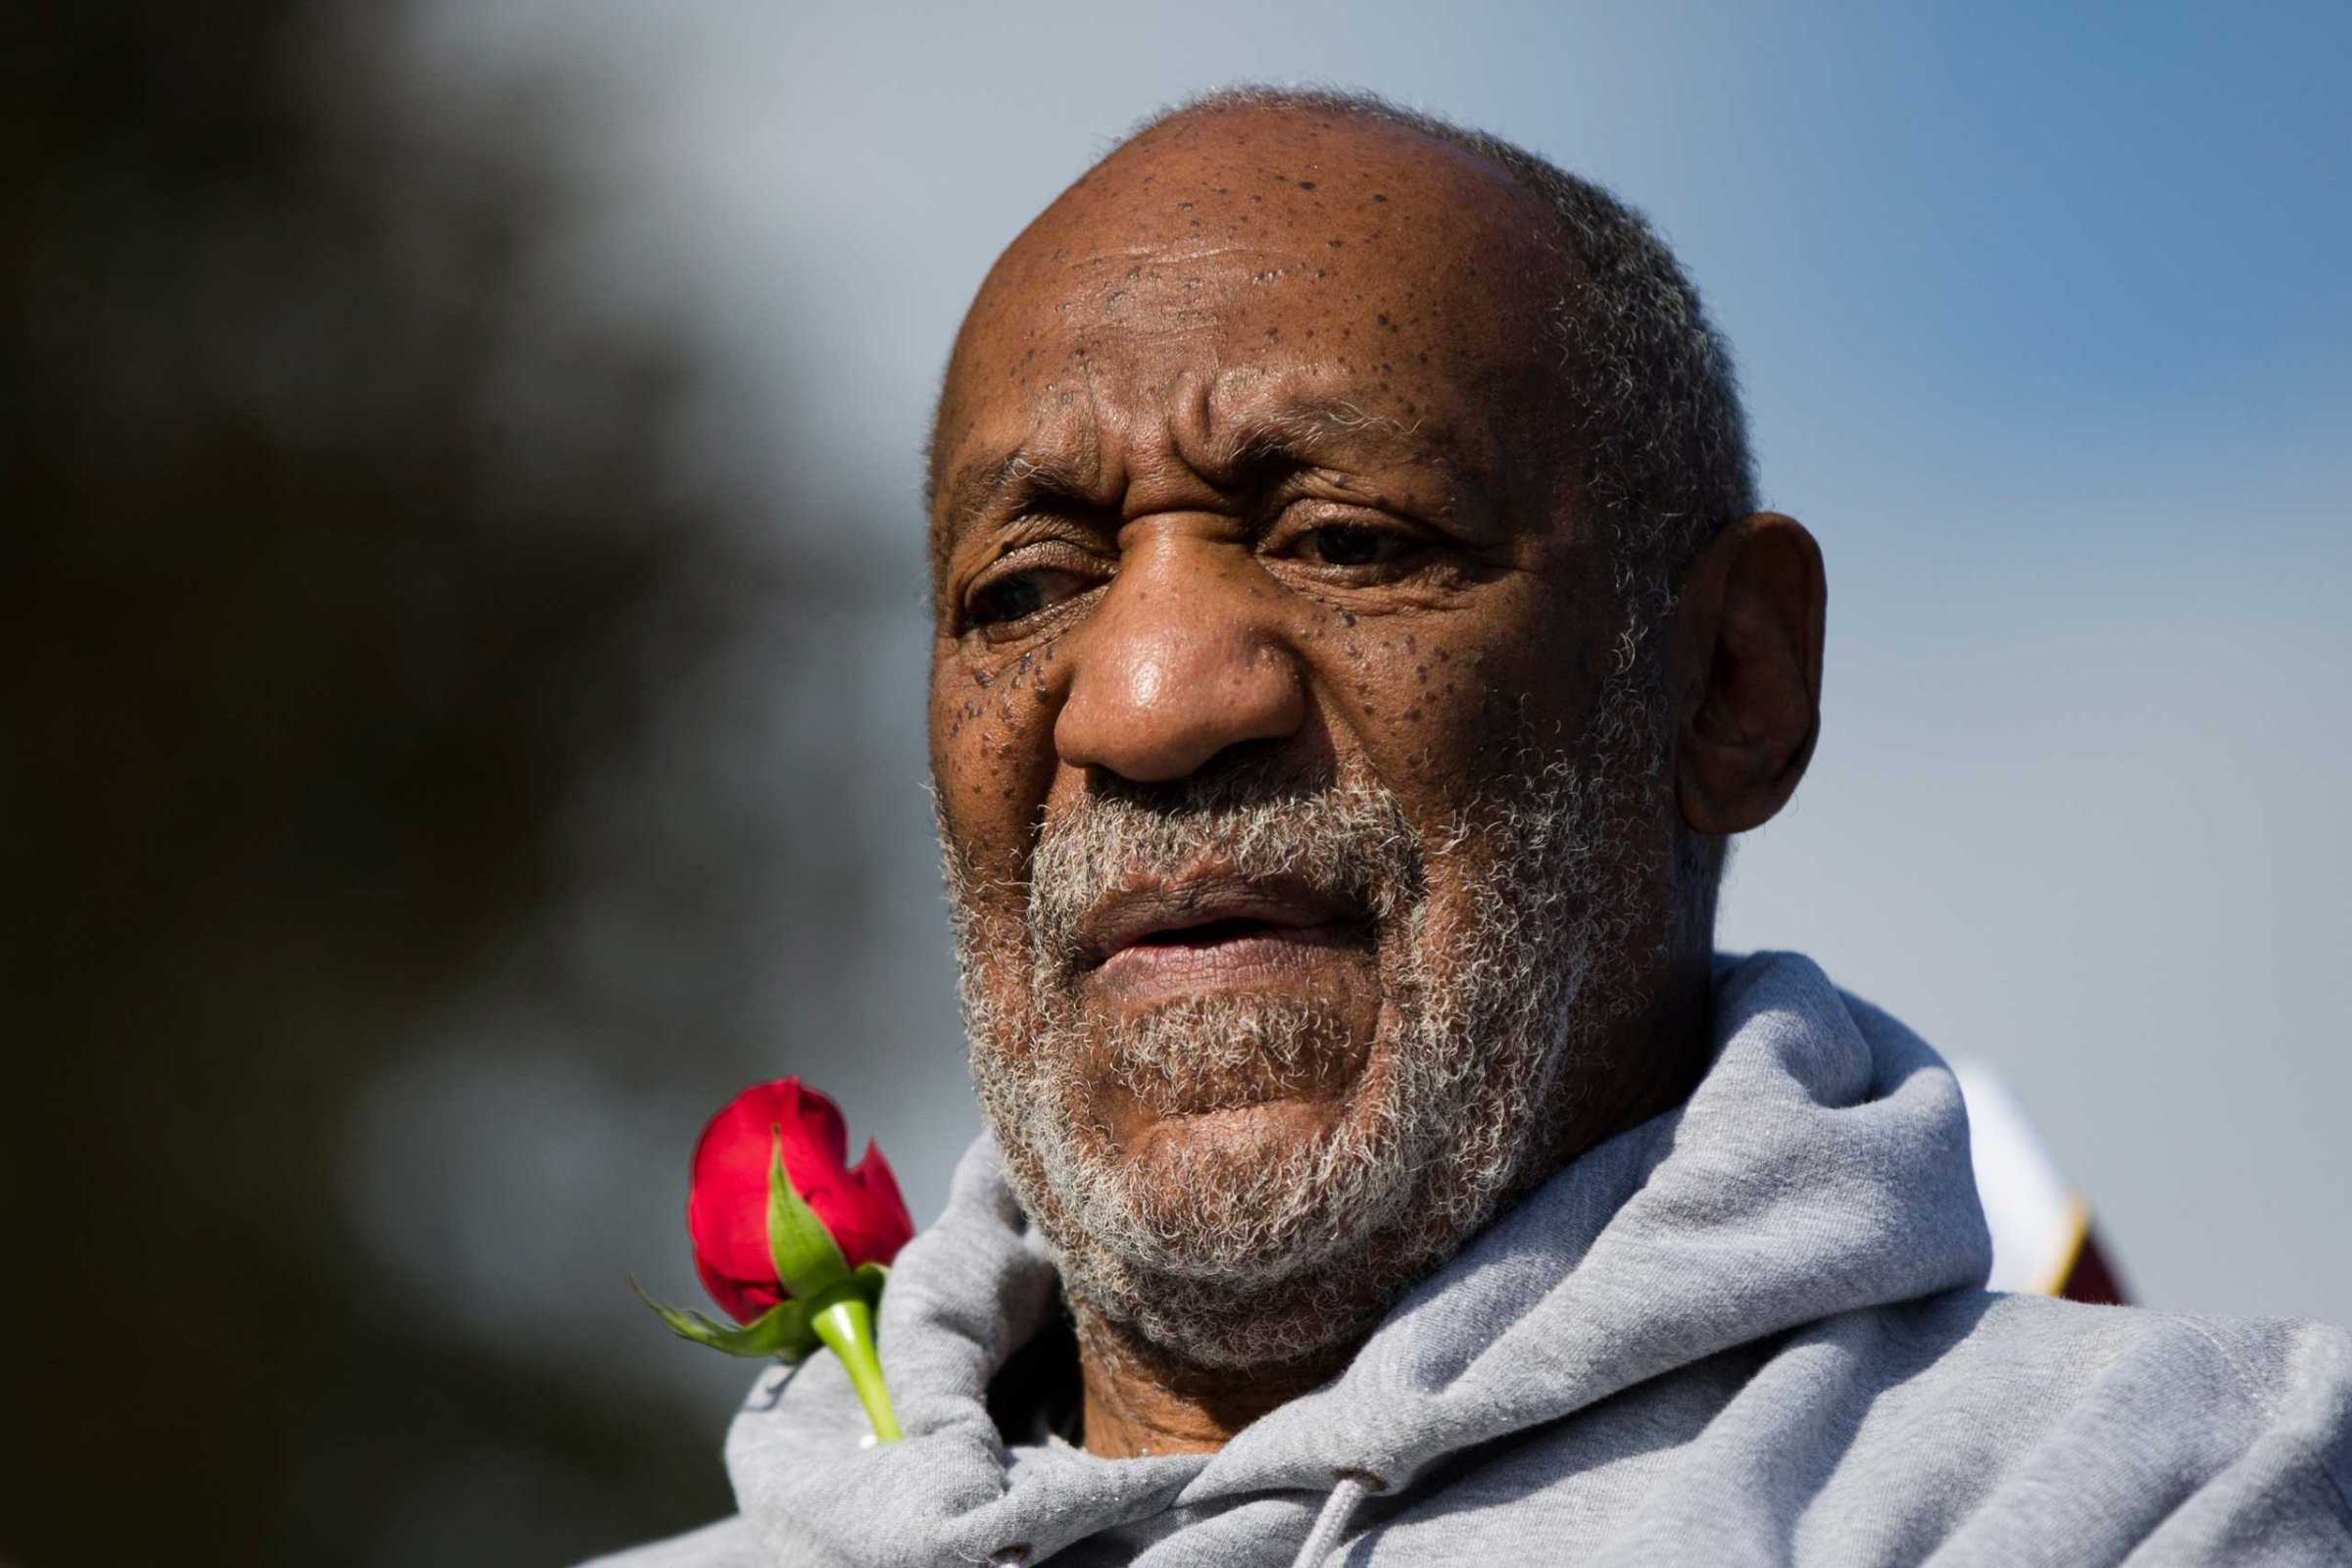 Entertainer and Navy veteran Bill Cosby at a Veterans Day ceremony, Nov. 11, 2014, at the The All Wars Memorial to Colored Soldiers and Sailors in Philadelphia.